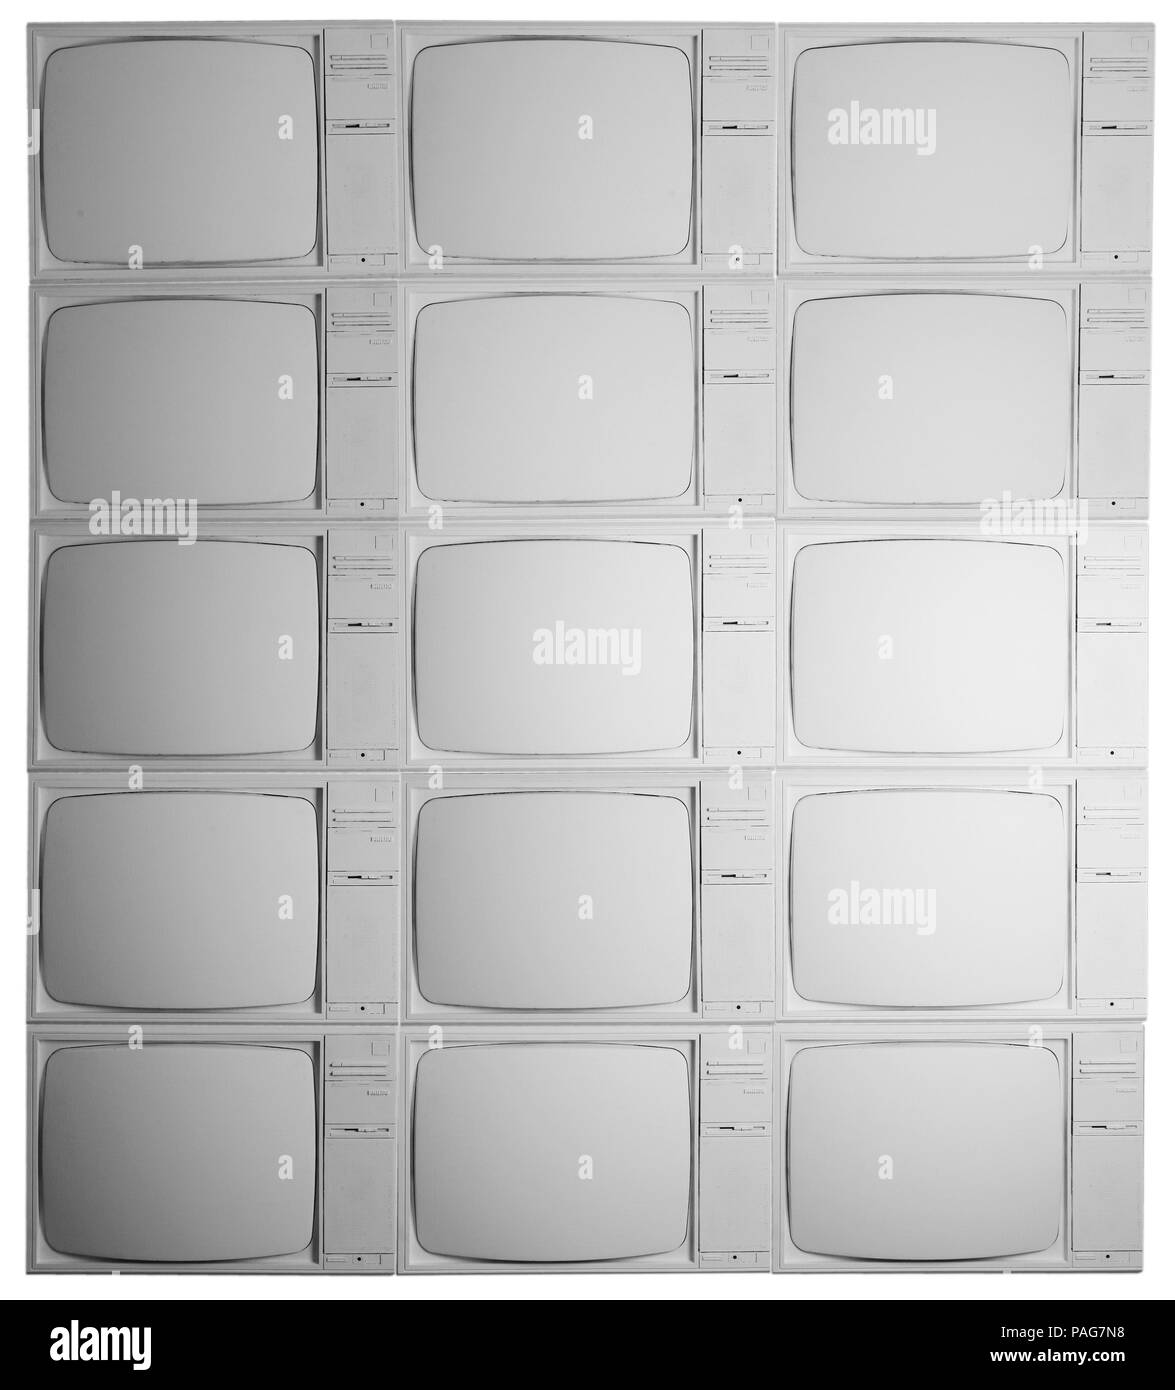 A bank of old televisions painted white. Stock Photo